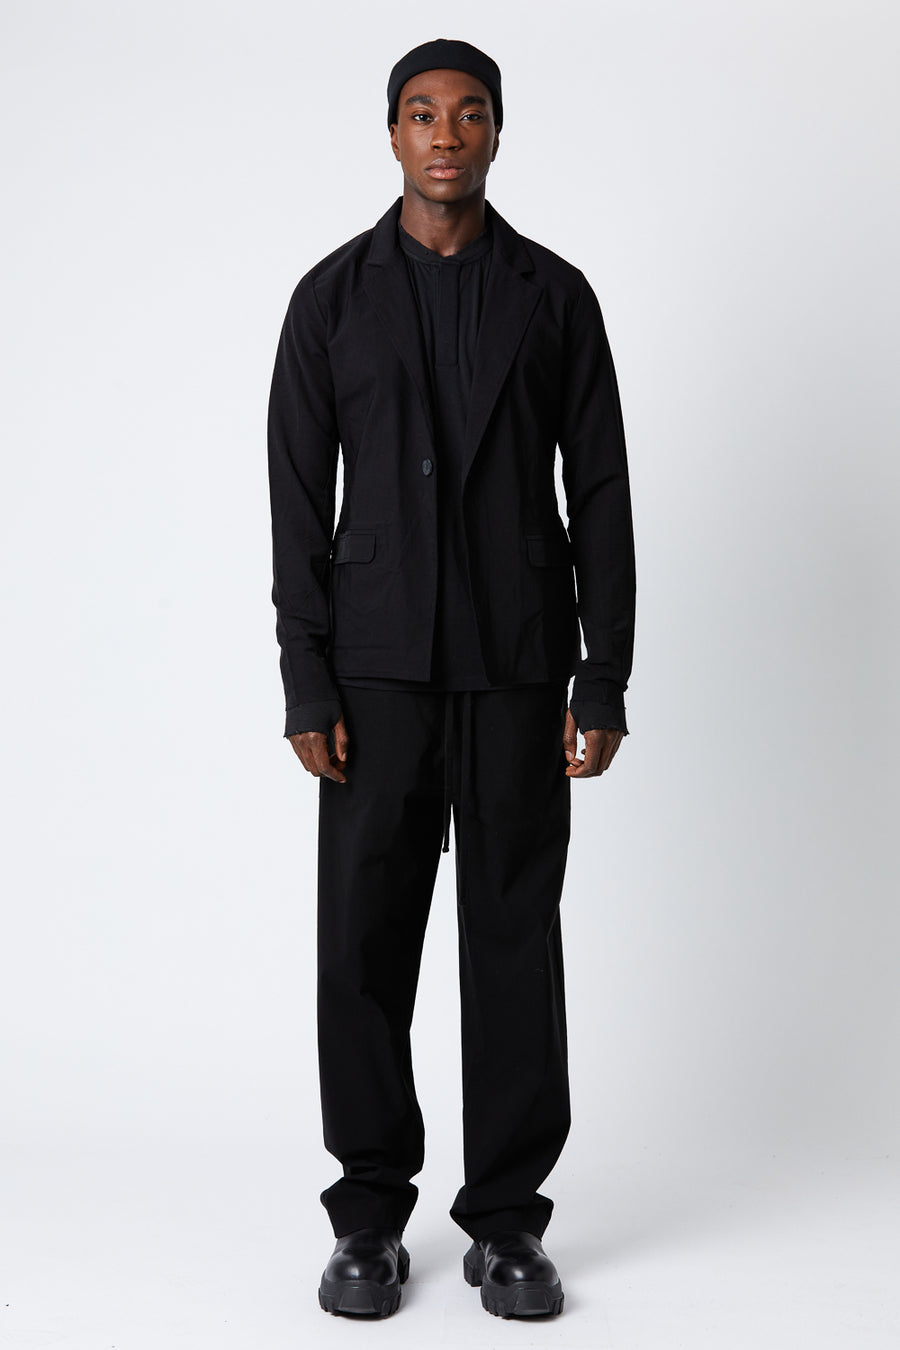 Buy the Thom Krom M SJ 566 Blazer Black at Intro. Spend £50 for free UK delivery. Official stockists. We ship worldwide.